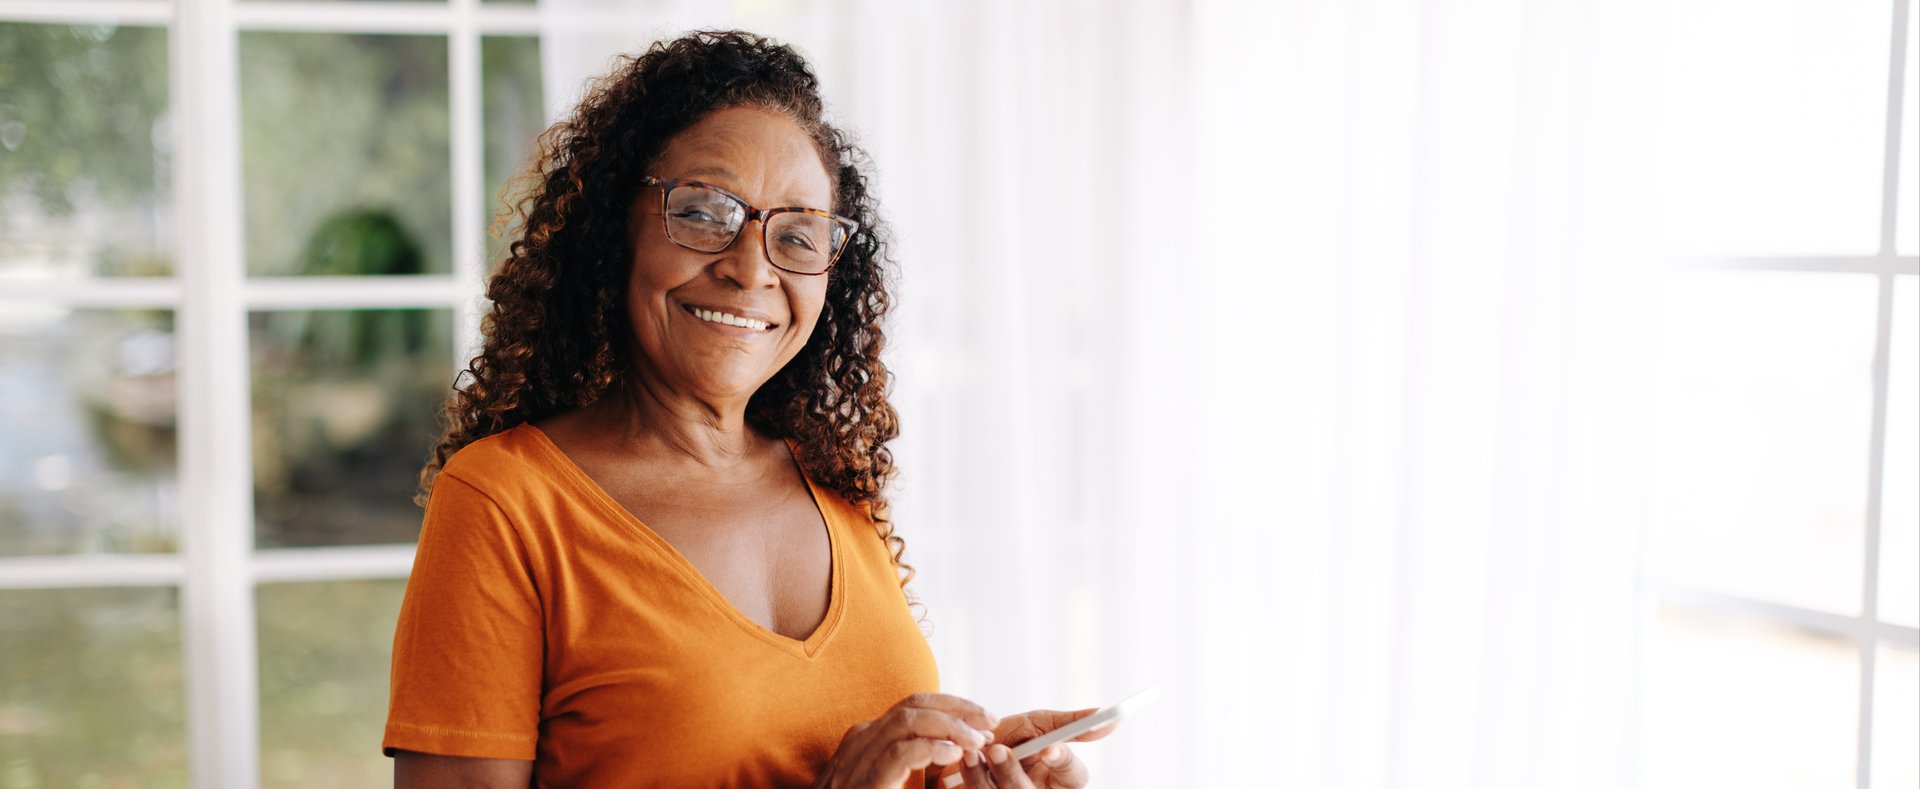 senior woman smiling with phone in hand